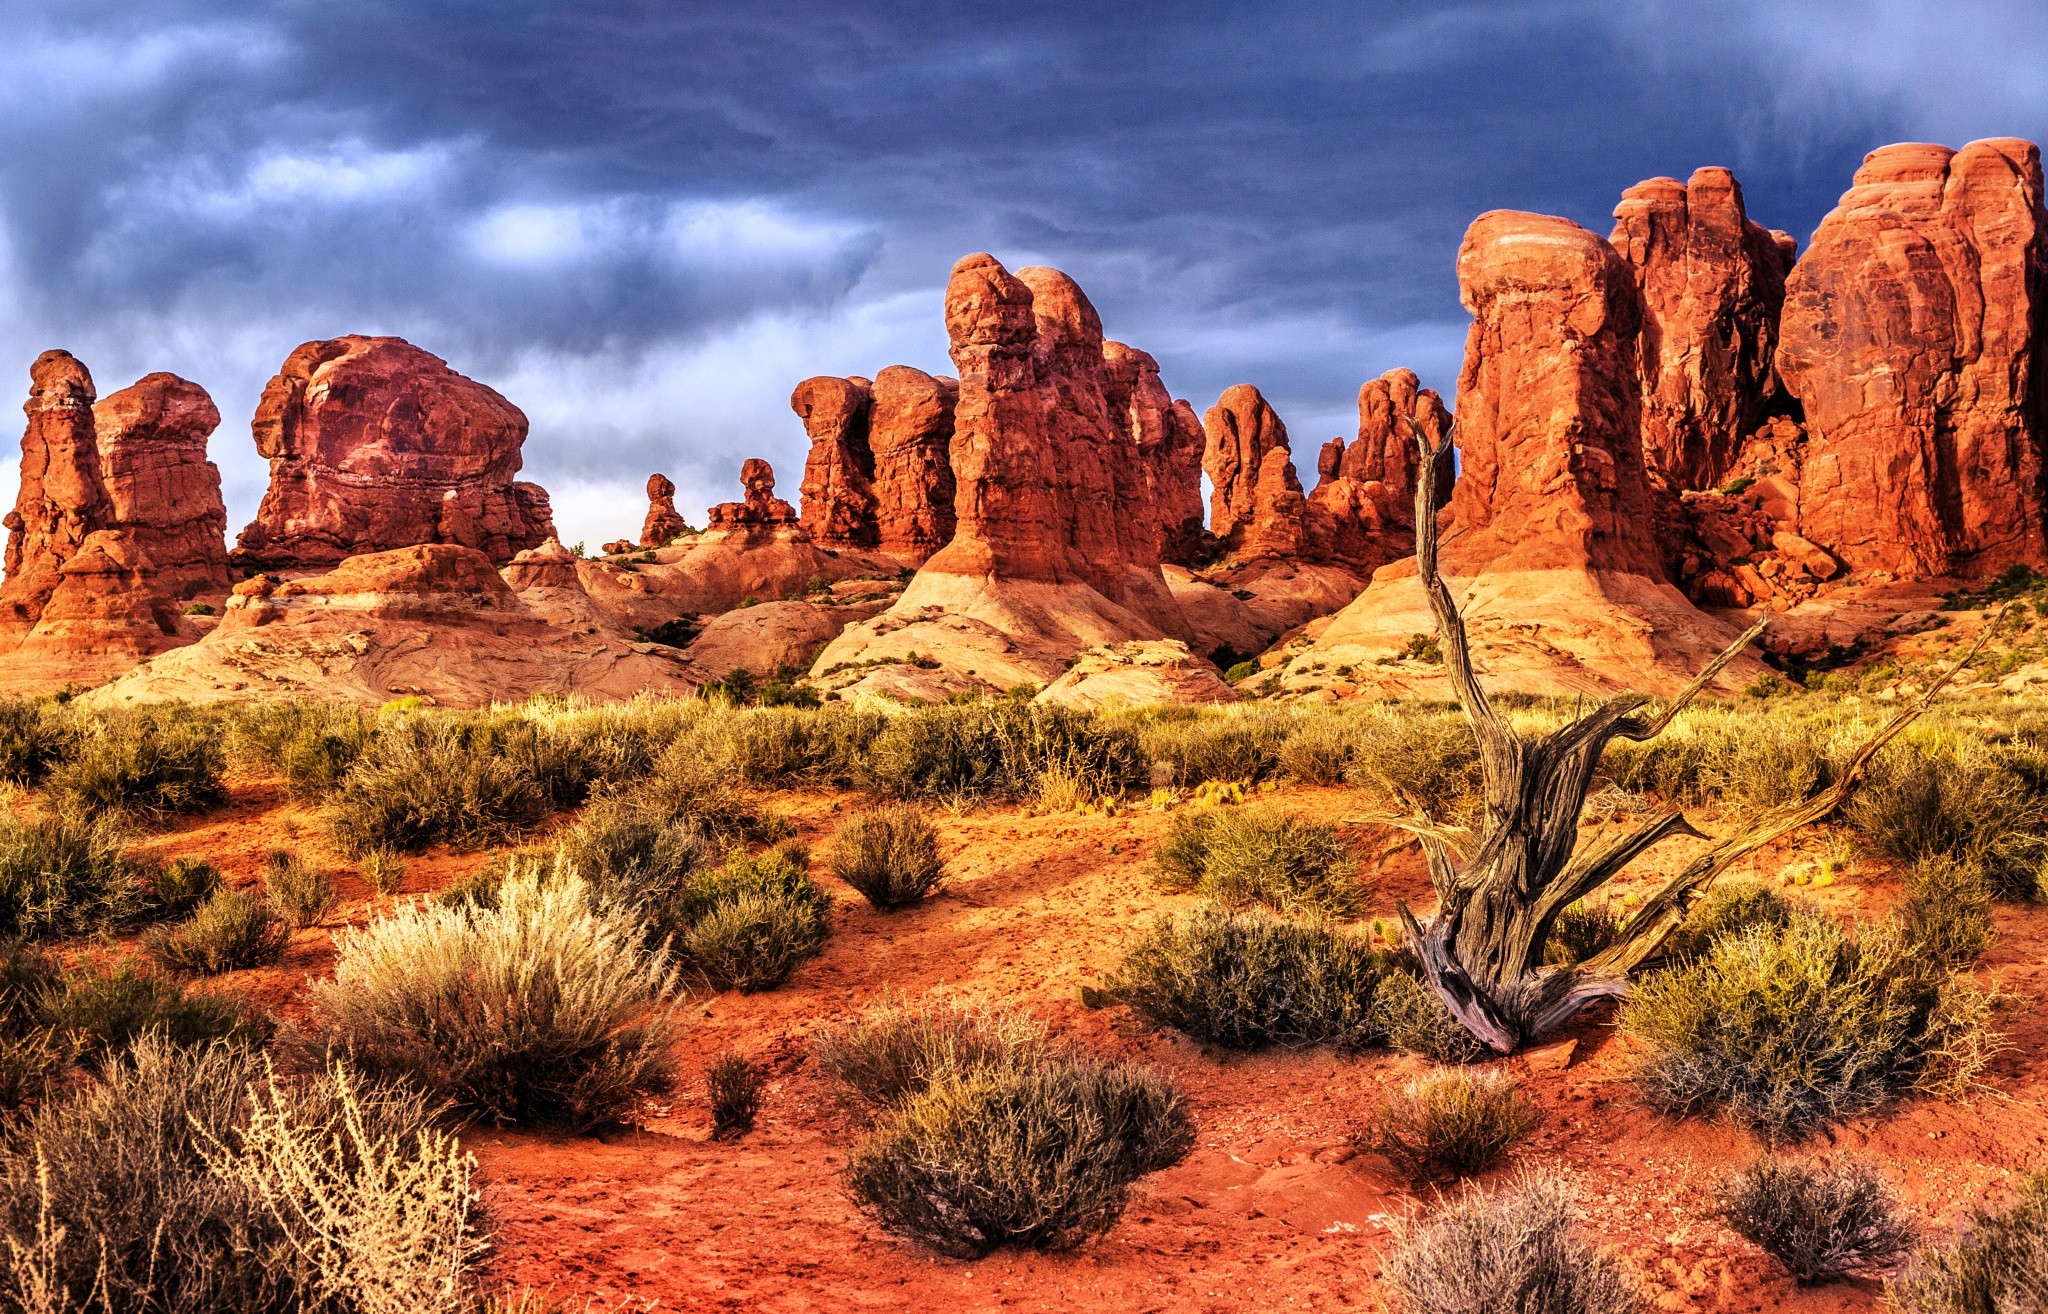  Wallpaper Background Free Arches National Park Utah Usa Clouds Plants